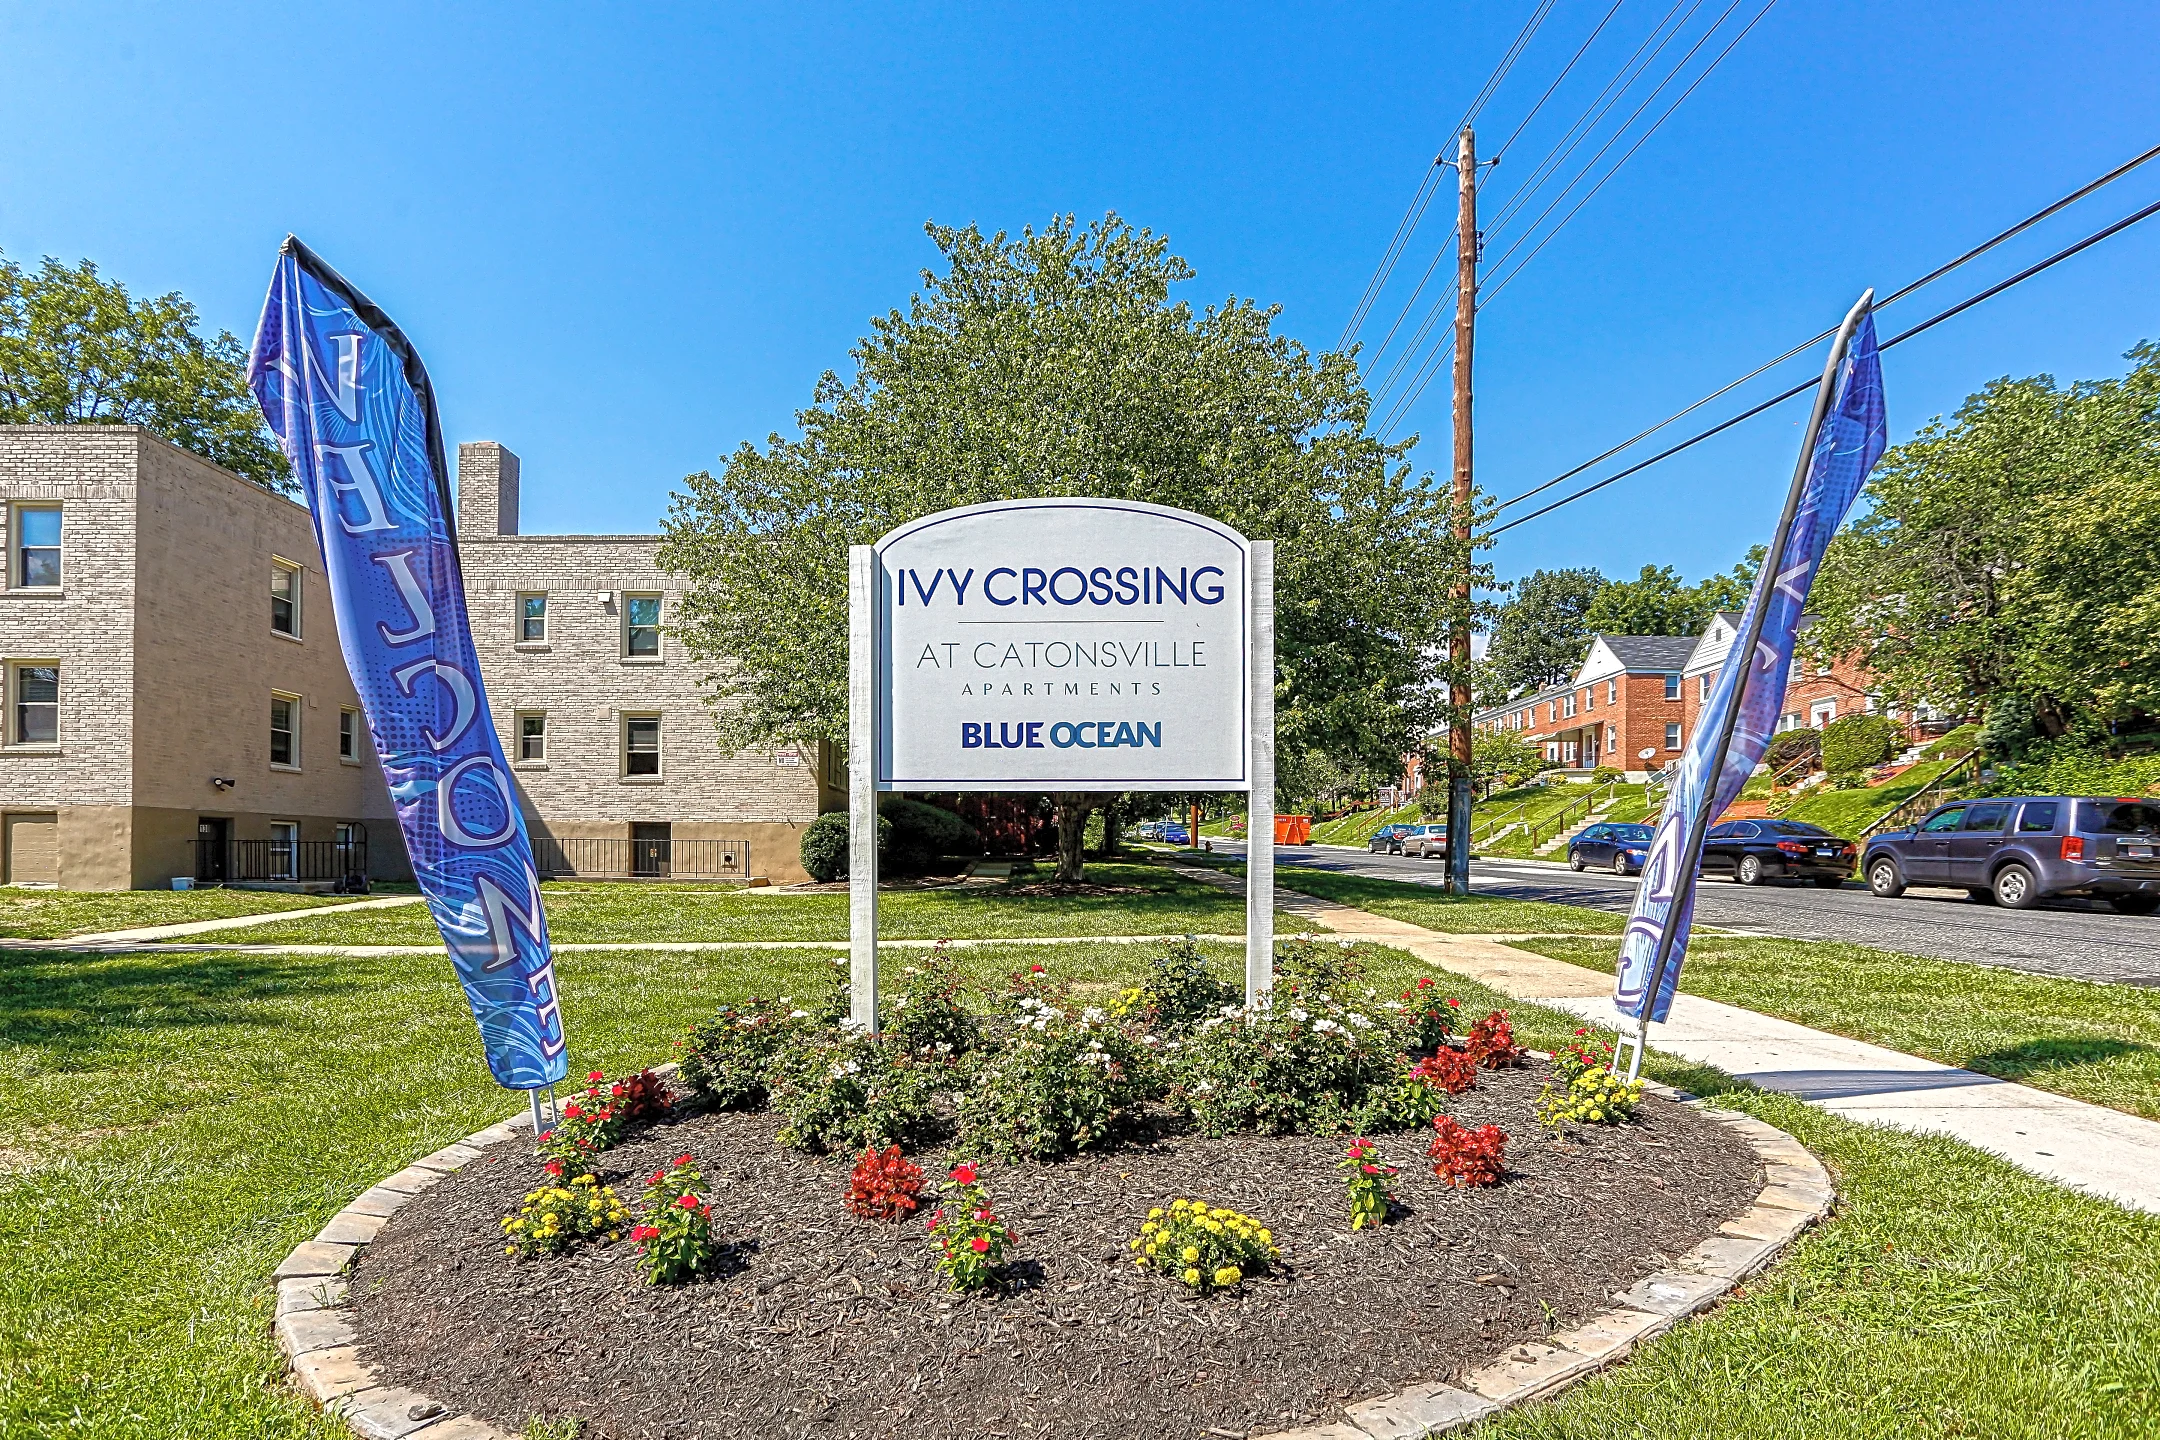 Ivy Crossing at Catonsville Apartments - Catonsville, MD